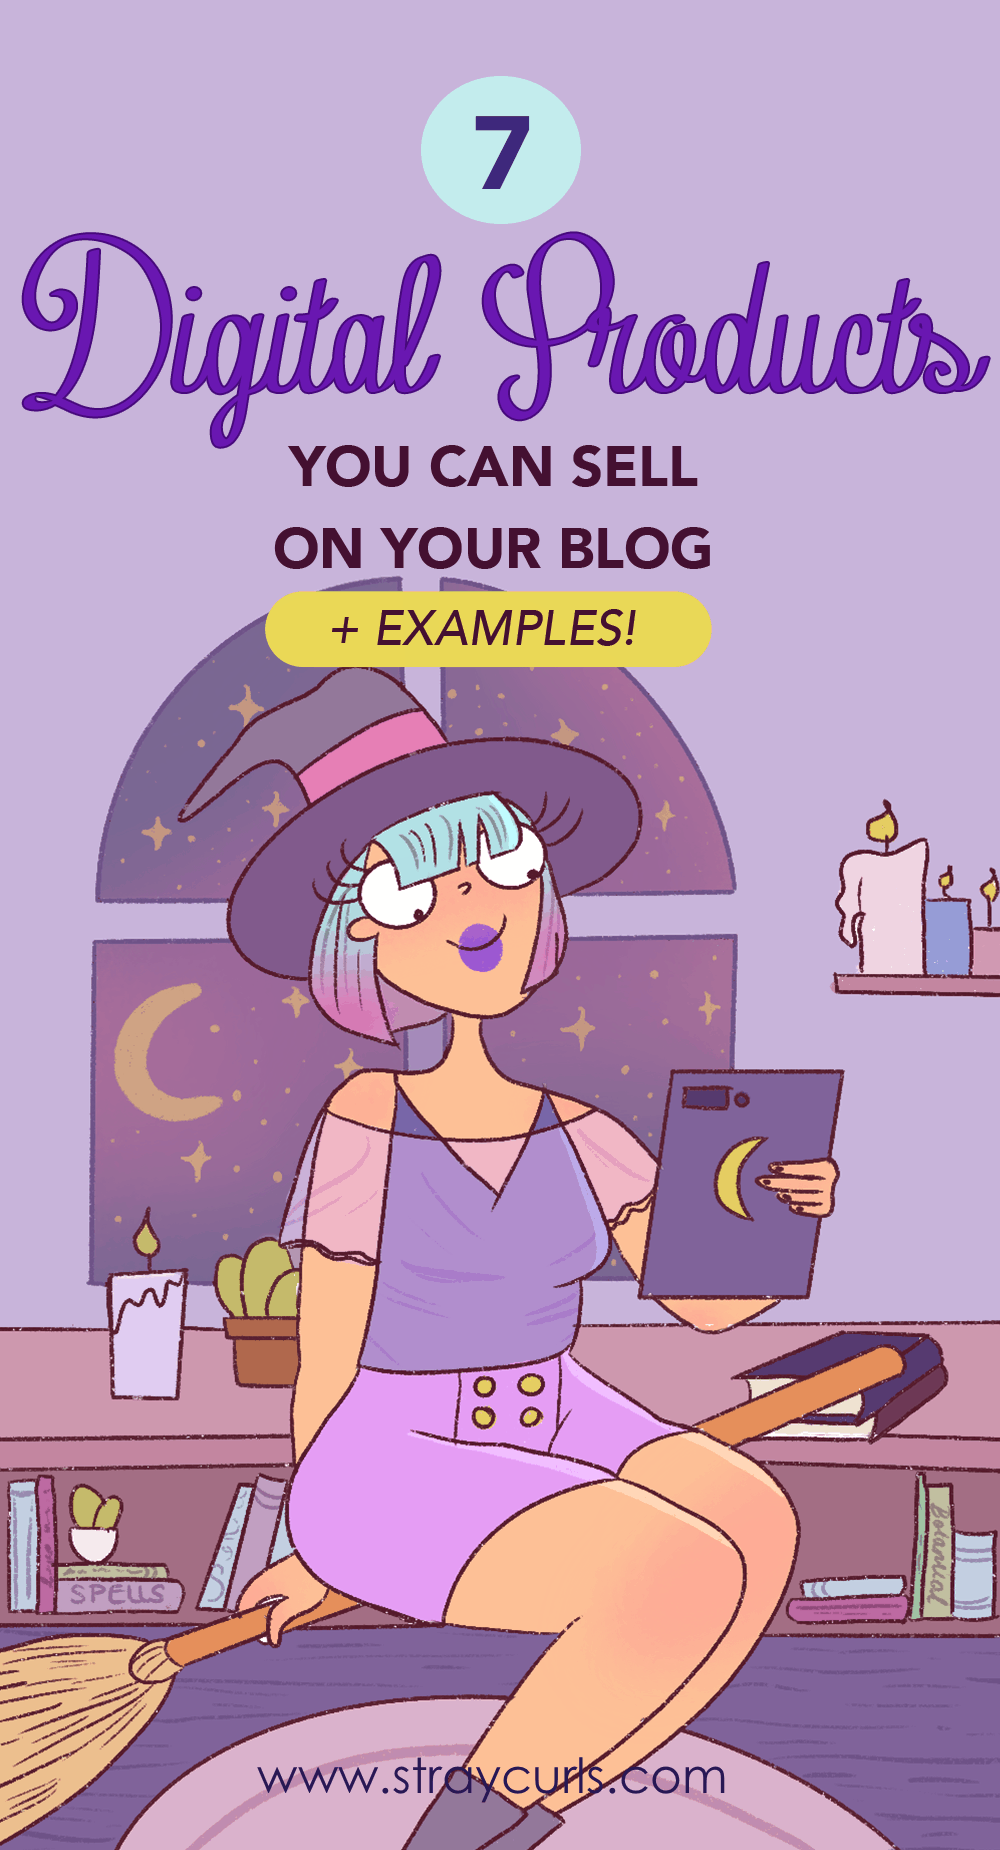 Wondering what digital products to sell in your blog? This post will help you by giving you a list of digital products that you can create and sell on your blog. It also includes digital product examples!